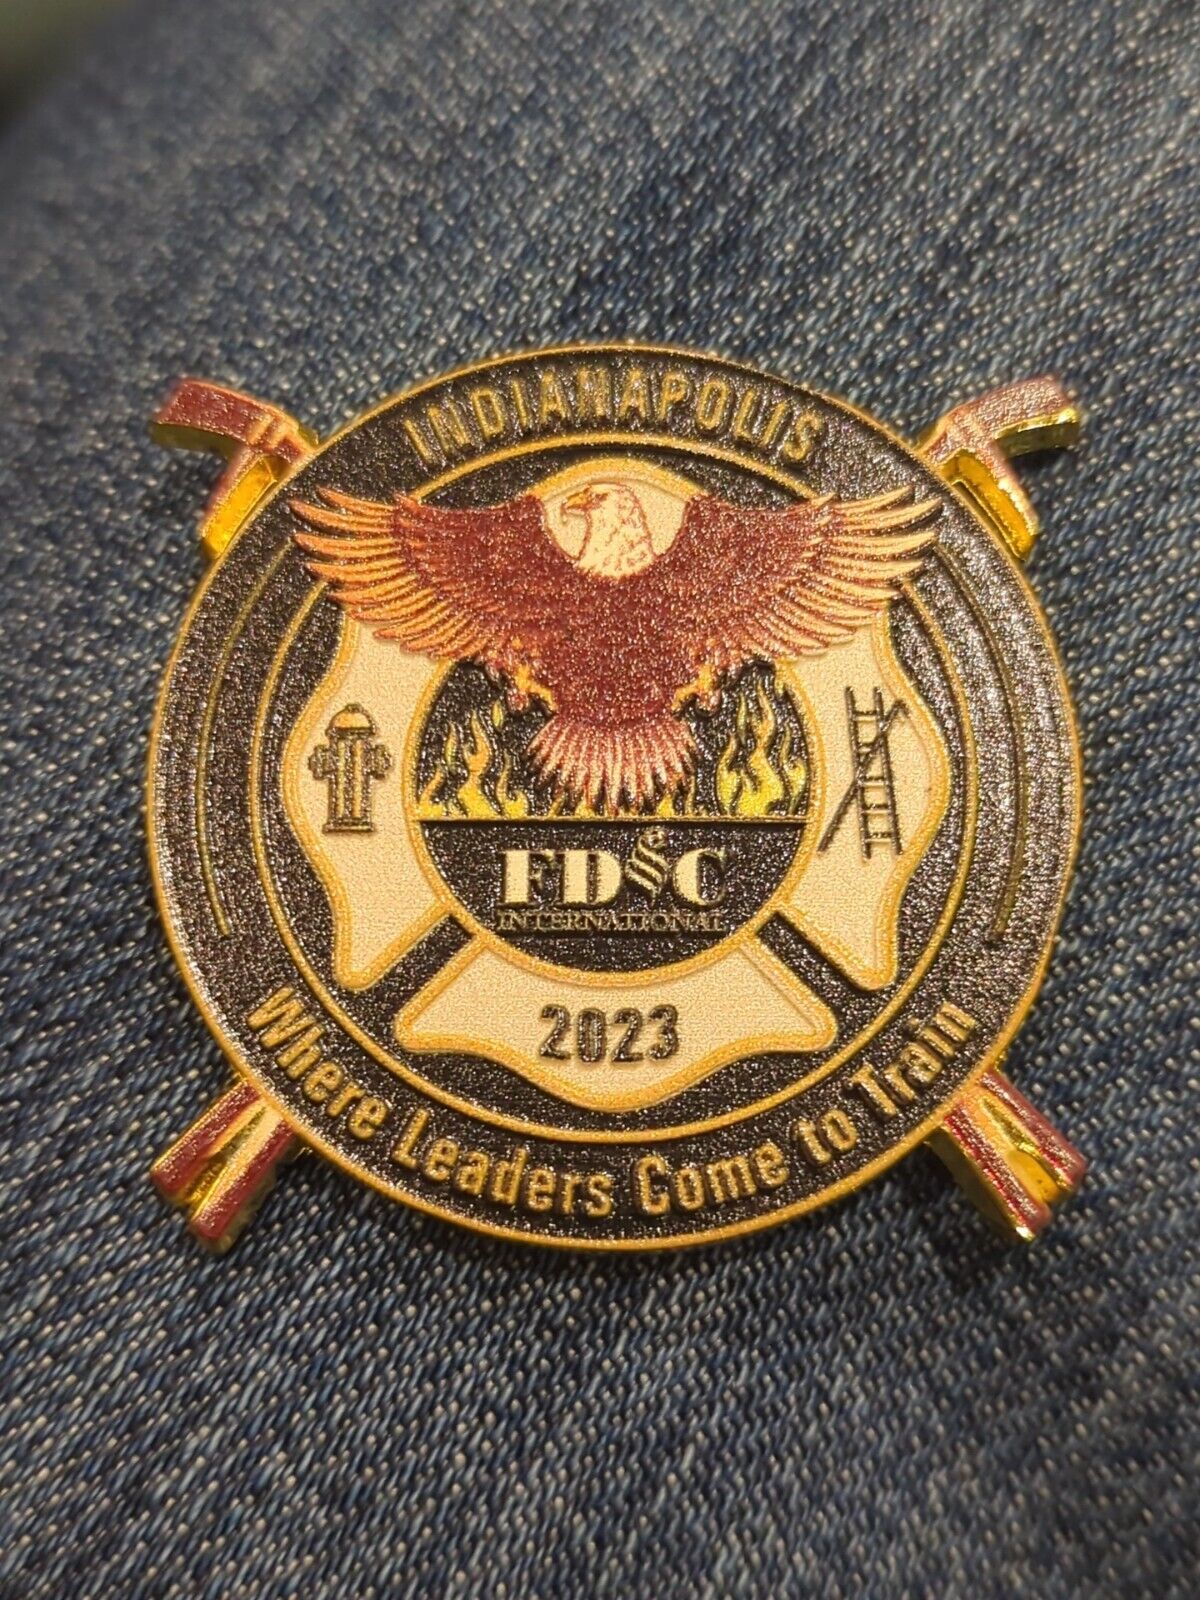 Fire Department Instructor Conference 2023 Challenge Coin FDIC Rescue INDY